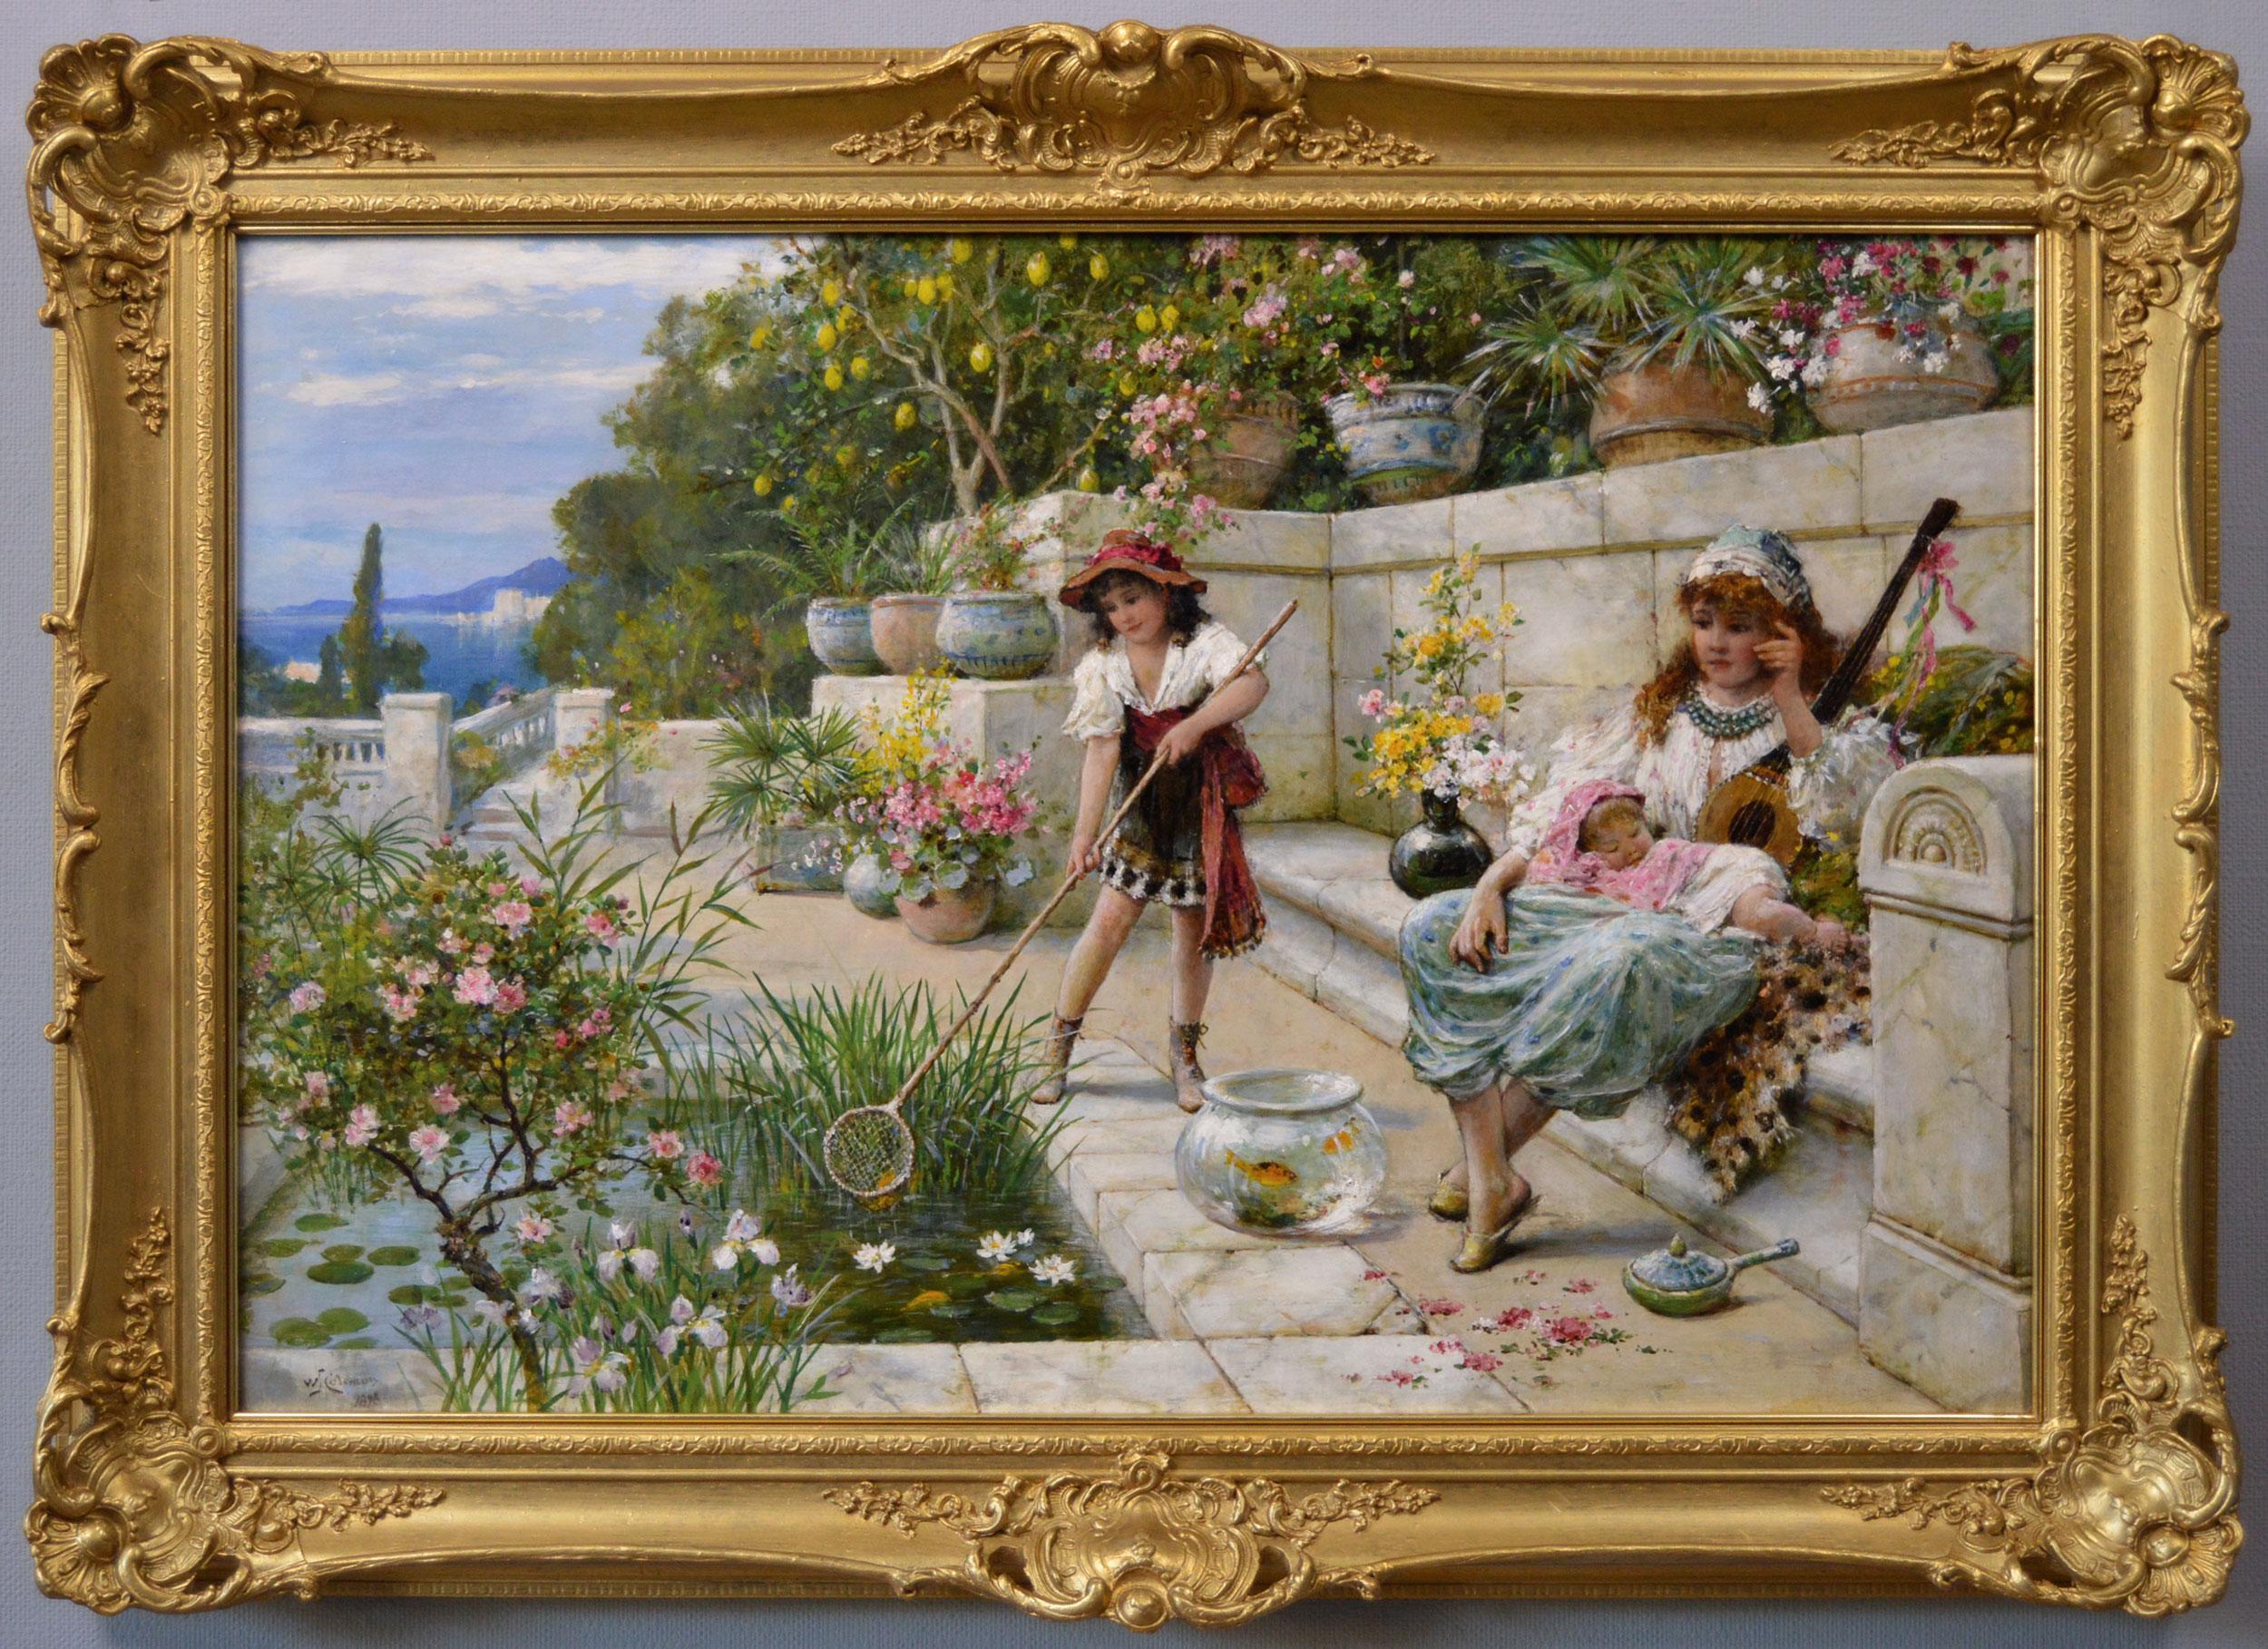 William Stephen Coleman Figurative Painting - 19th Century genre oil painting of a woman in a garden with two girls